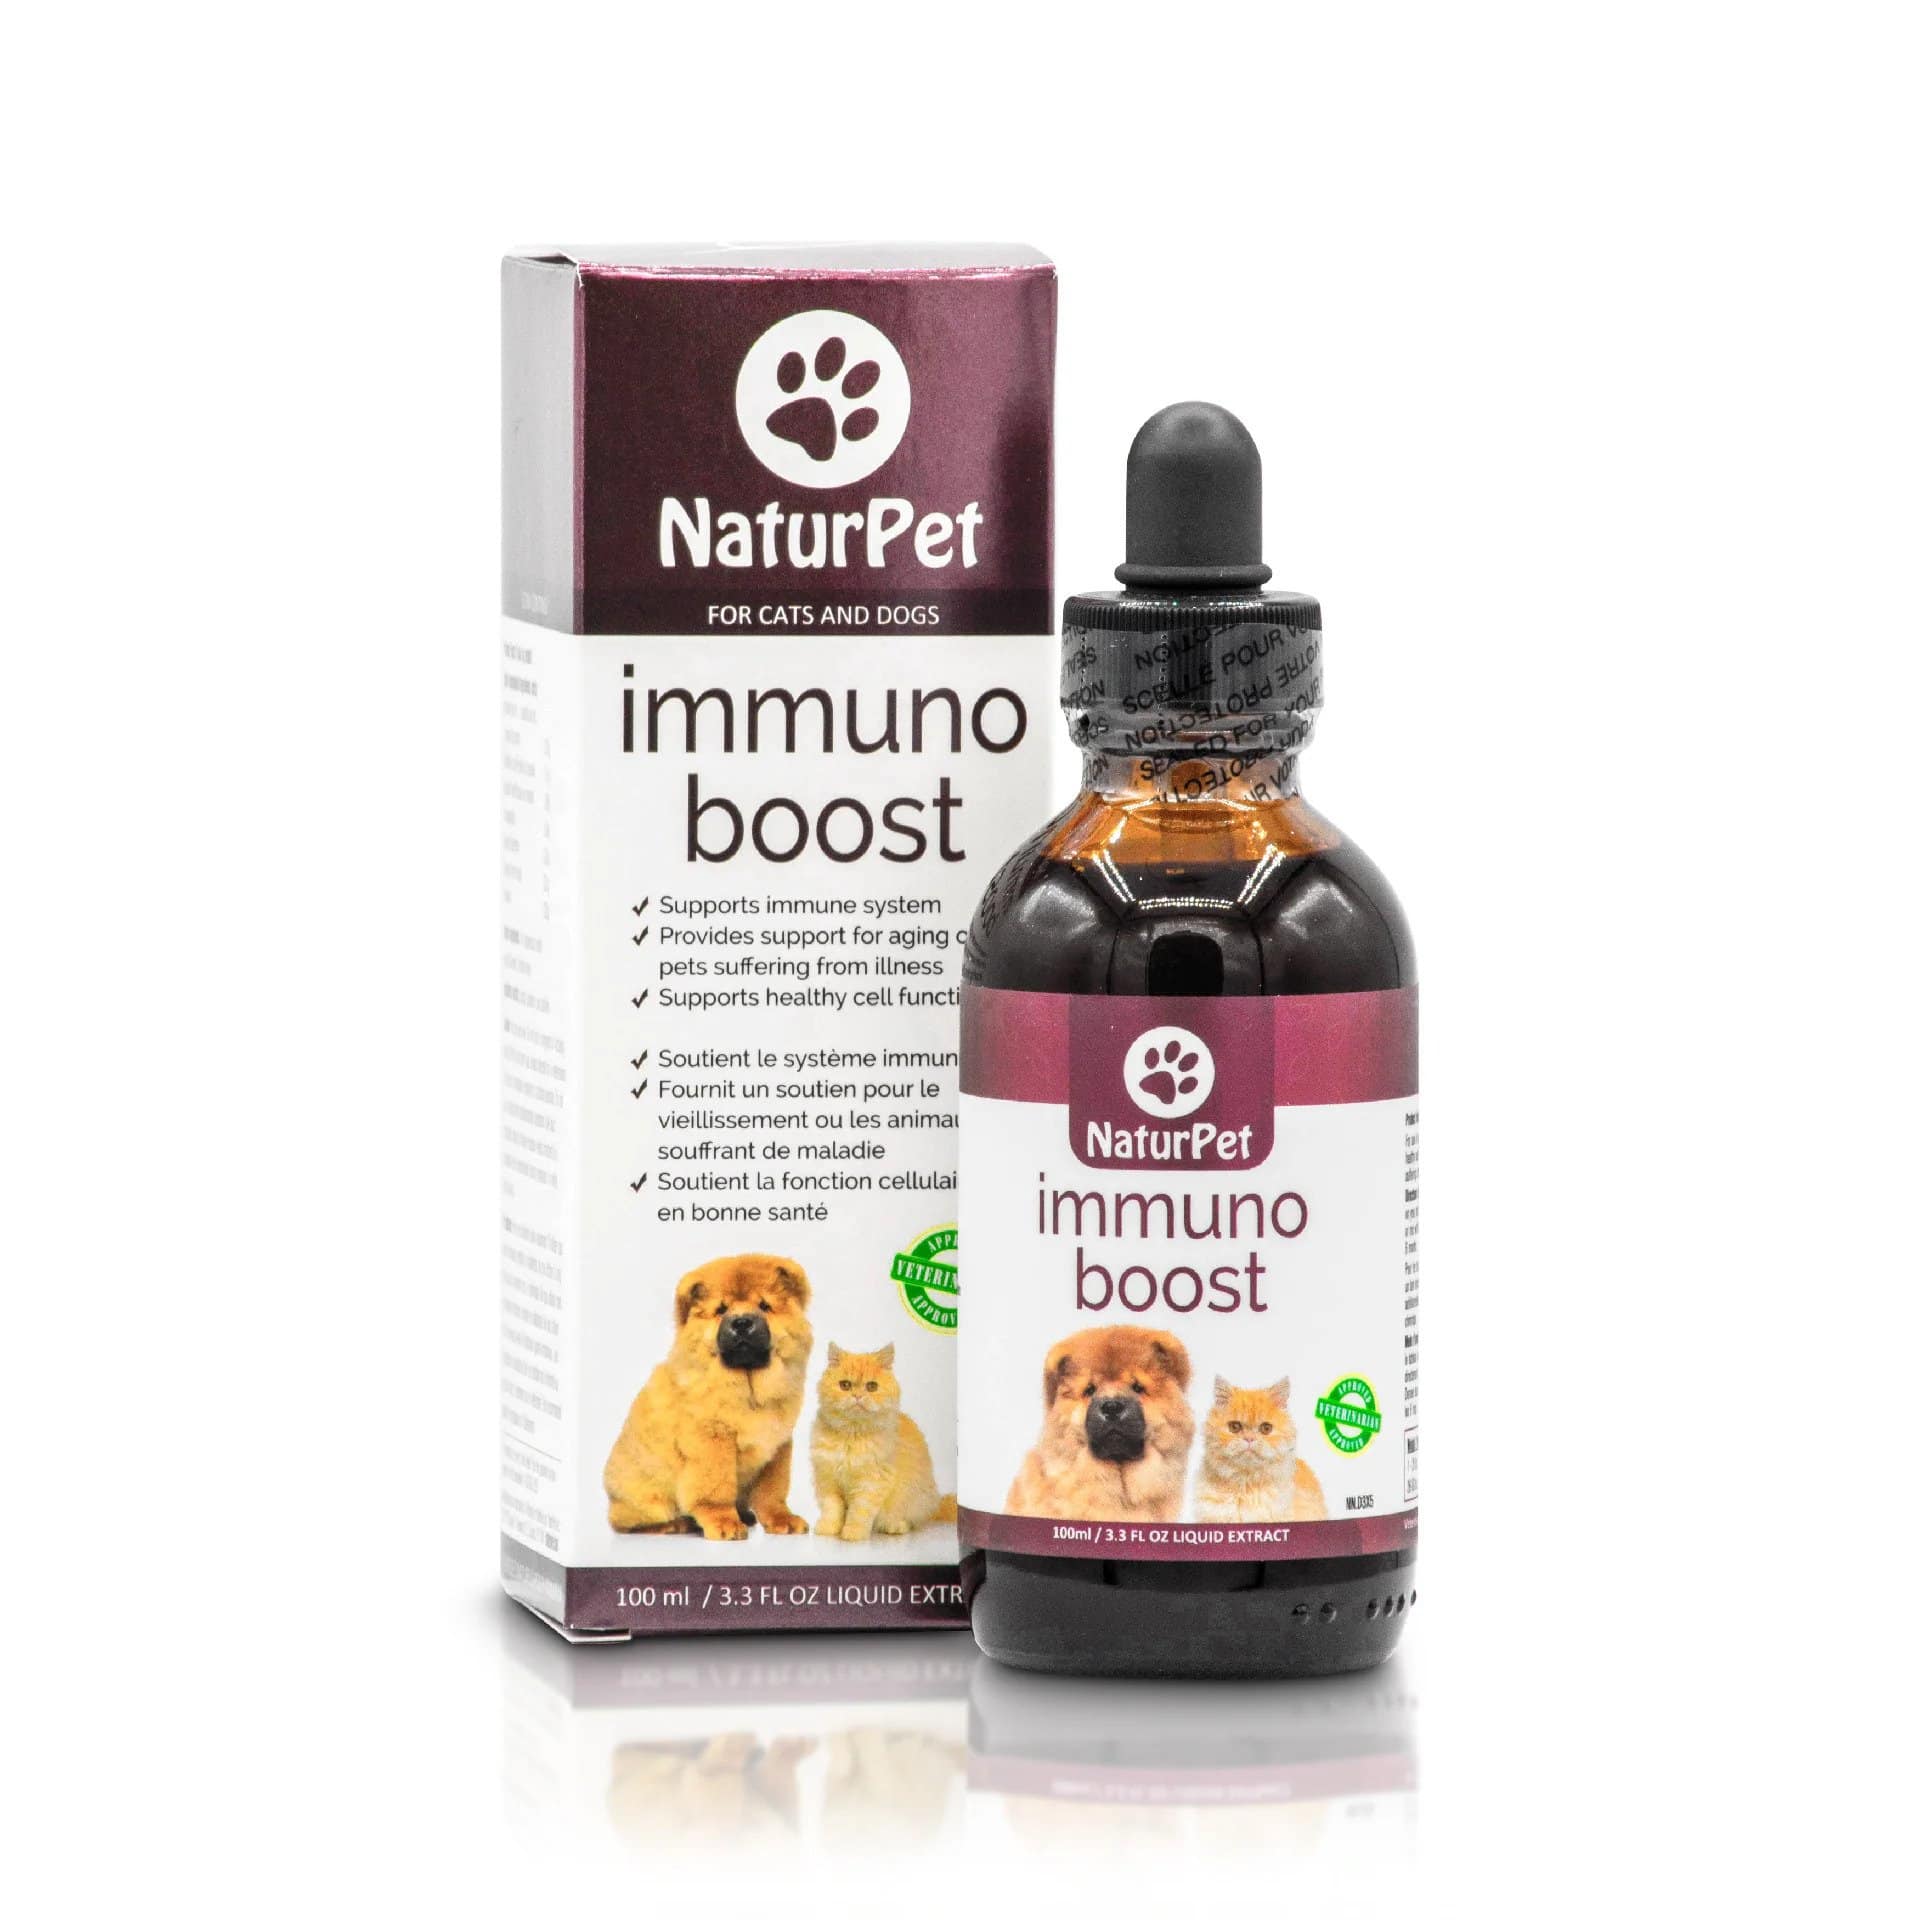 NaturPet Immuno Boost - Full System Support Actual